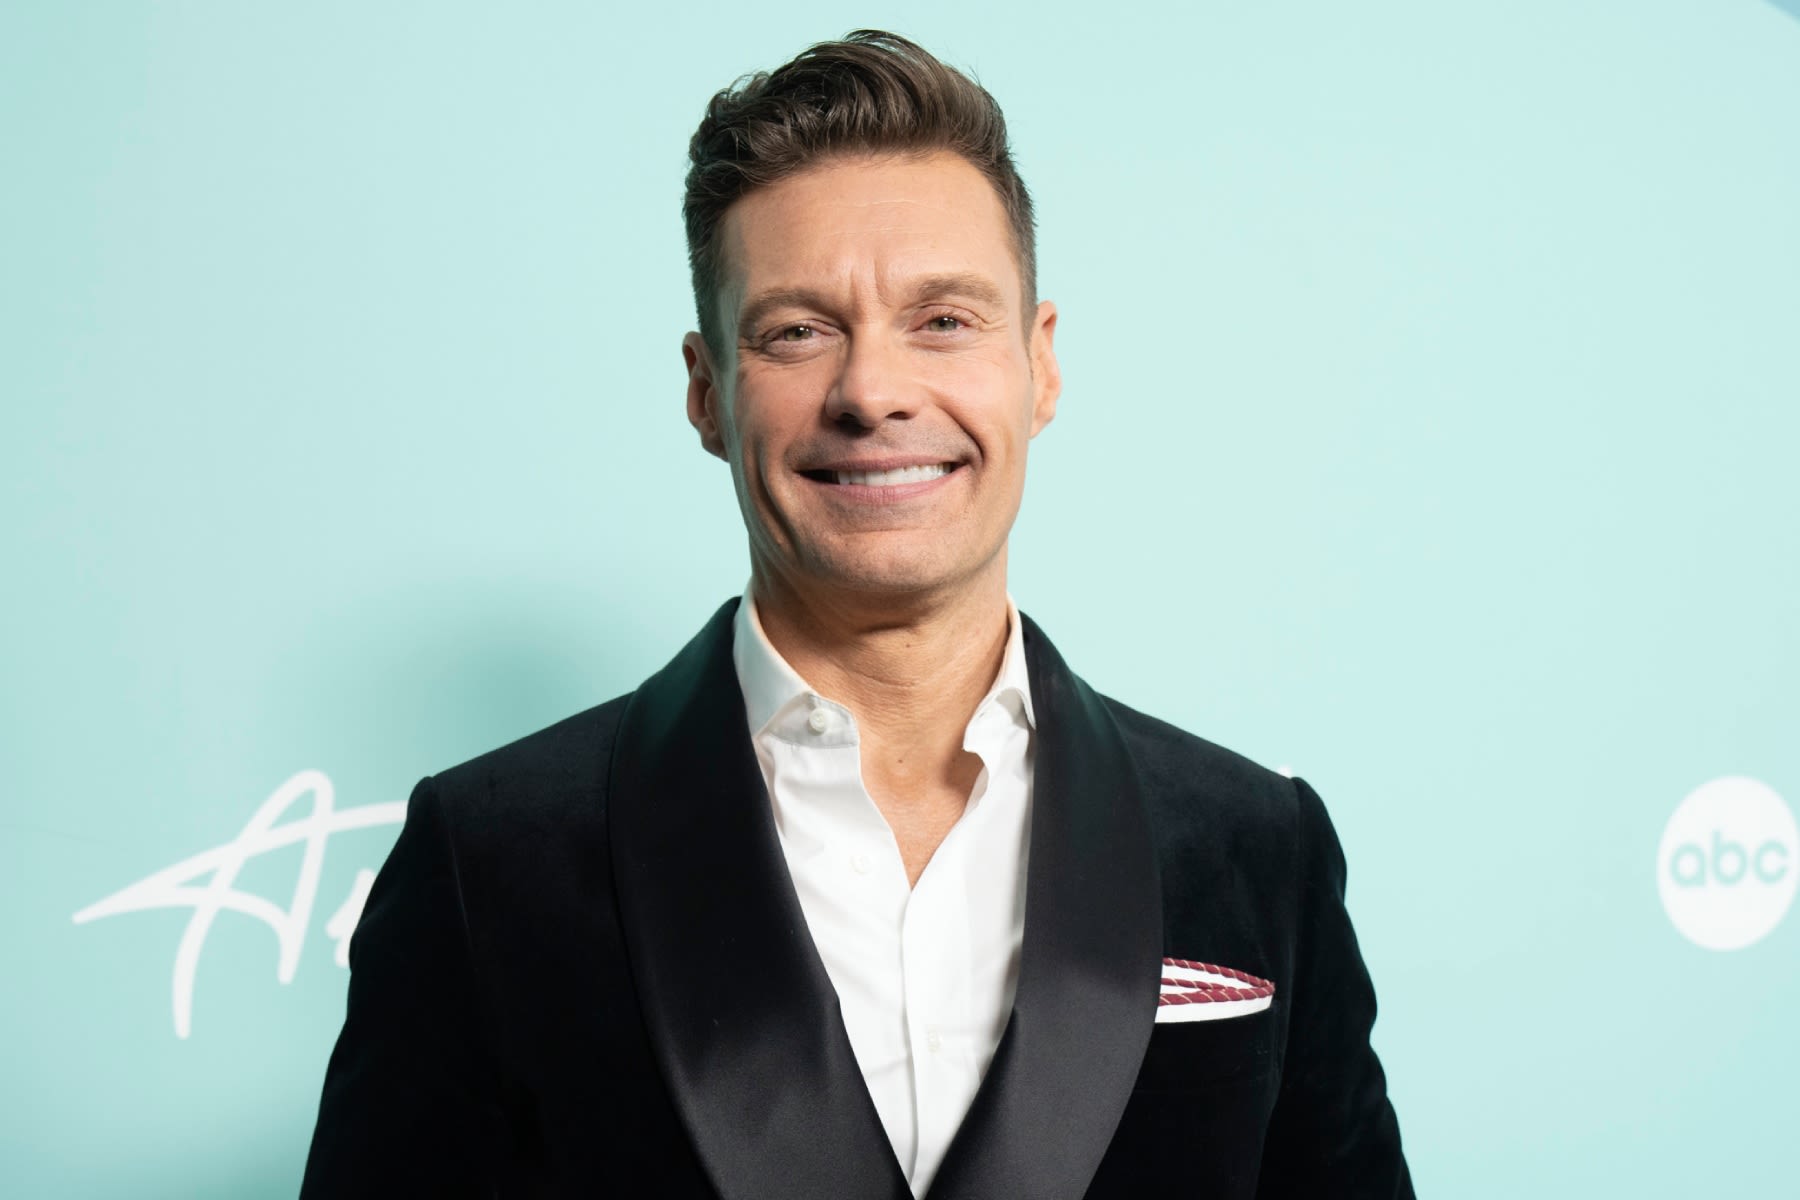 Ryan Seacrest ‘Spinning With Excitement’ After Officially Taking Over ‘Wheel of Fortune’